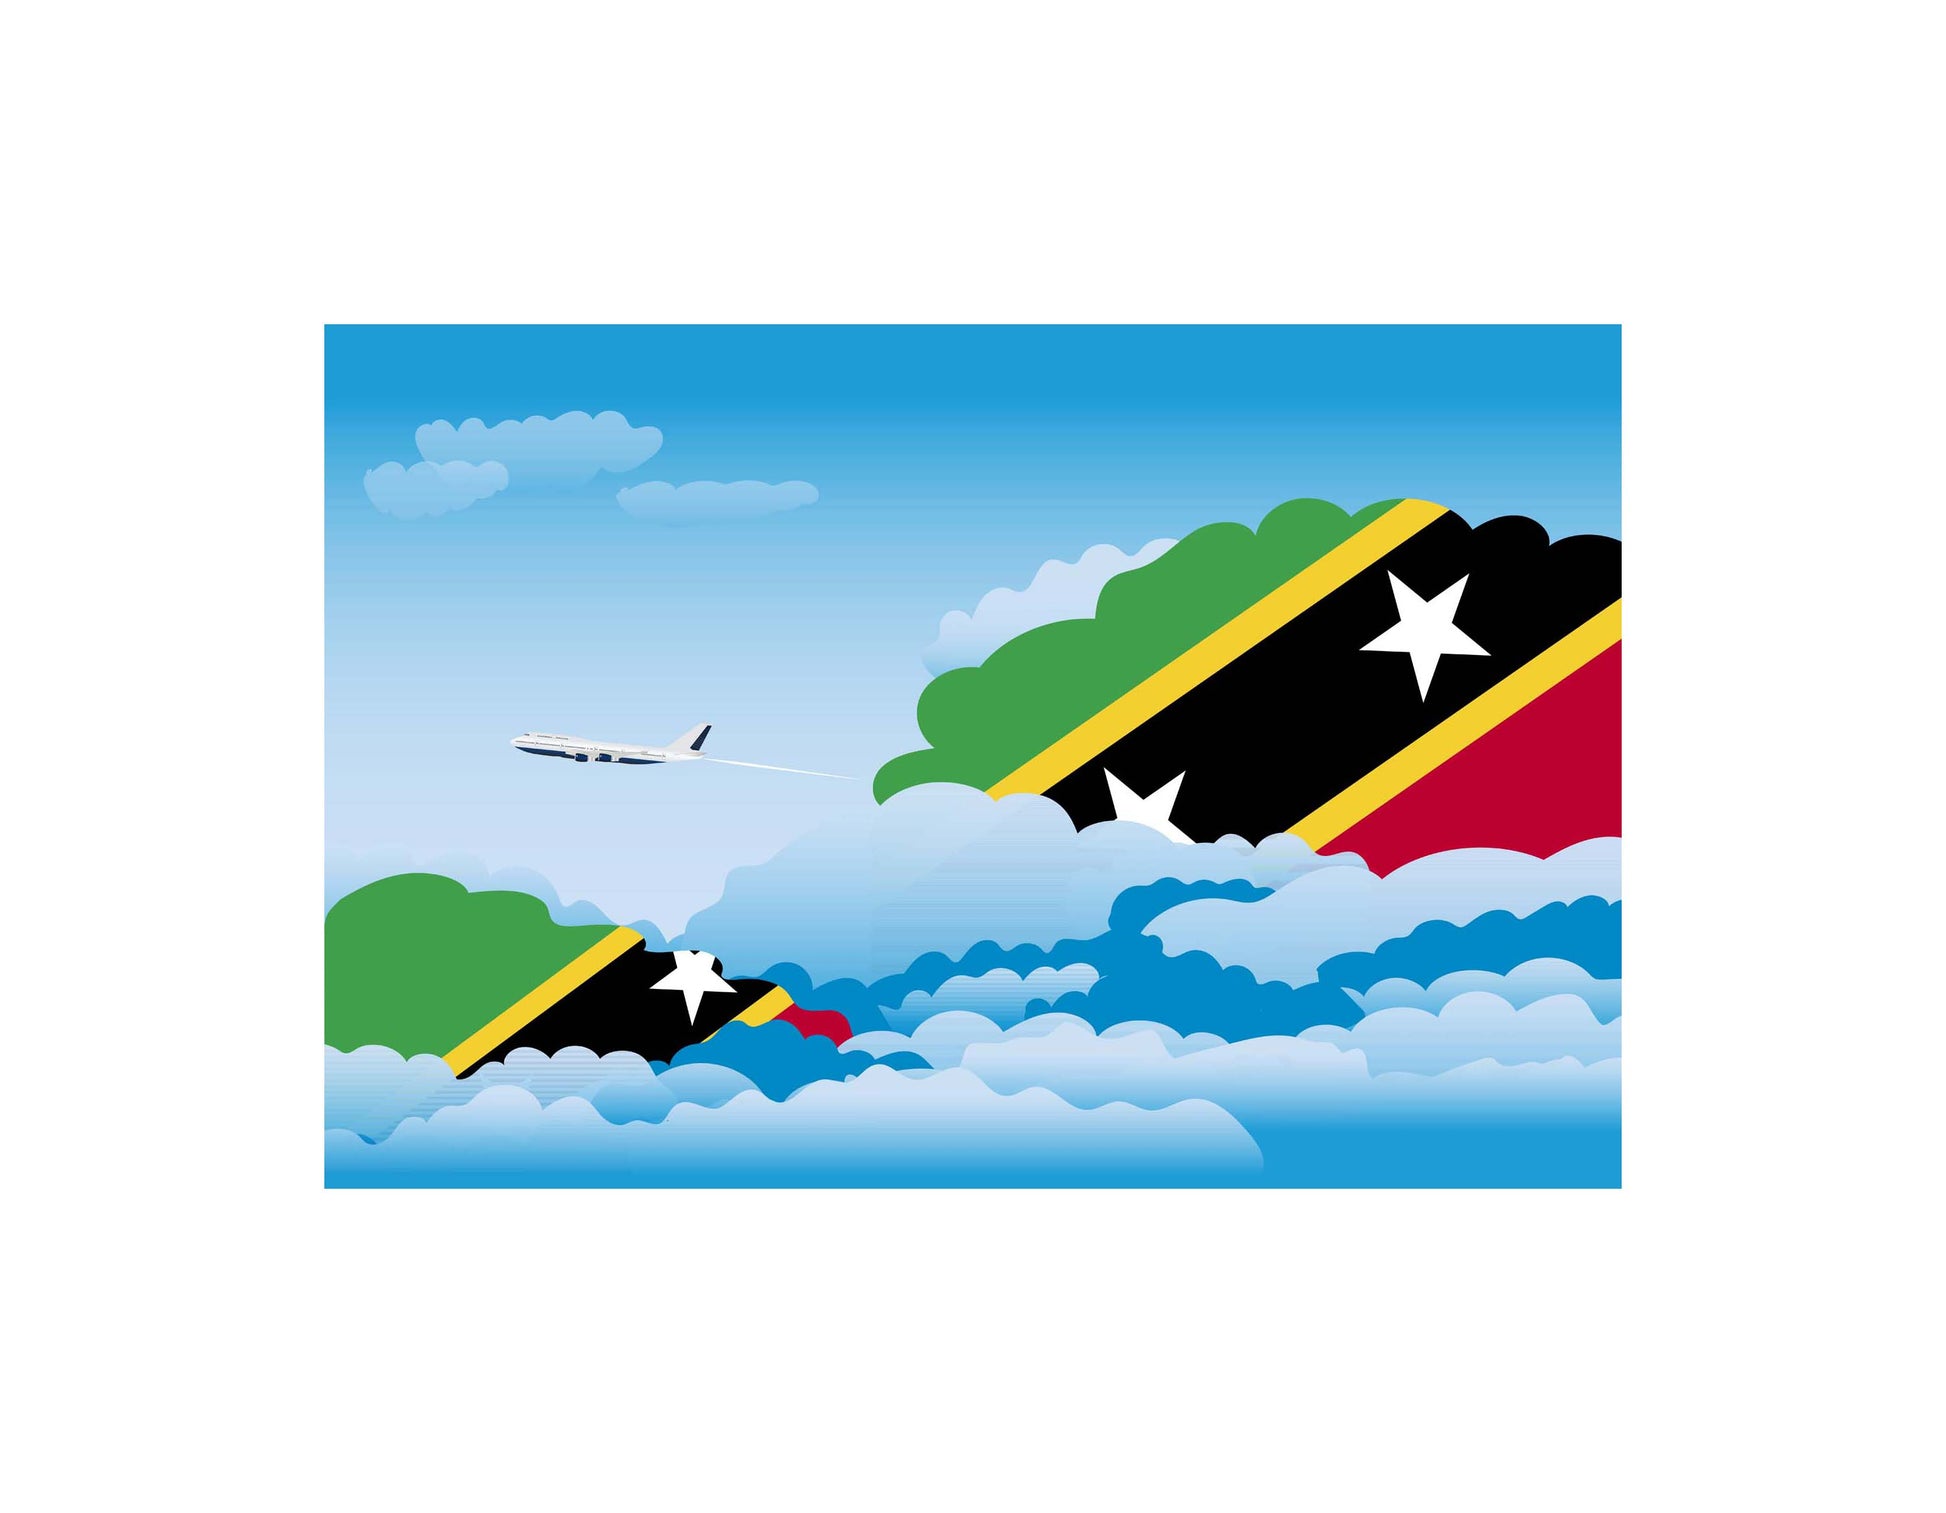 Saint Kitts and Nevis Flags Day Clouds Canvas Print Framed